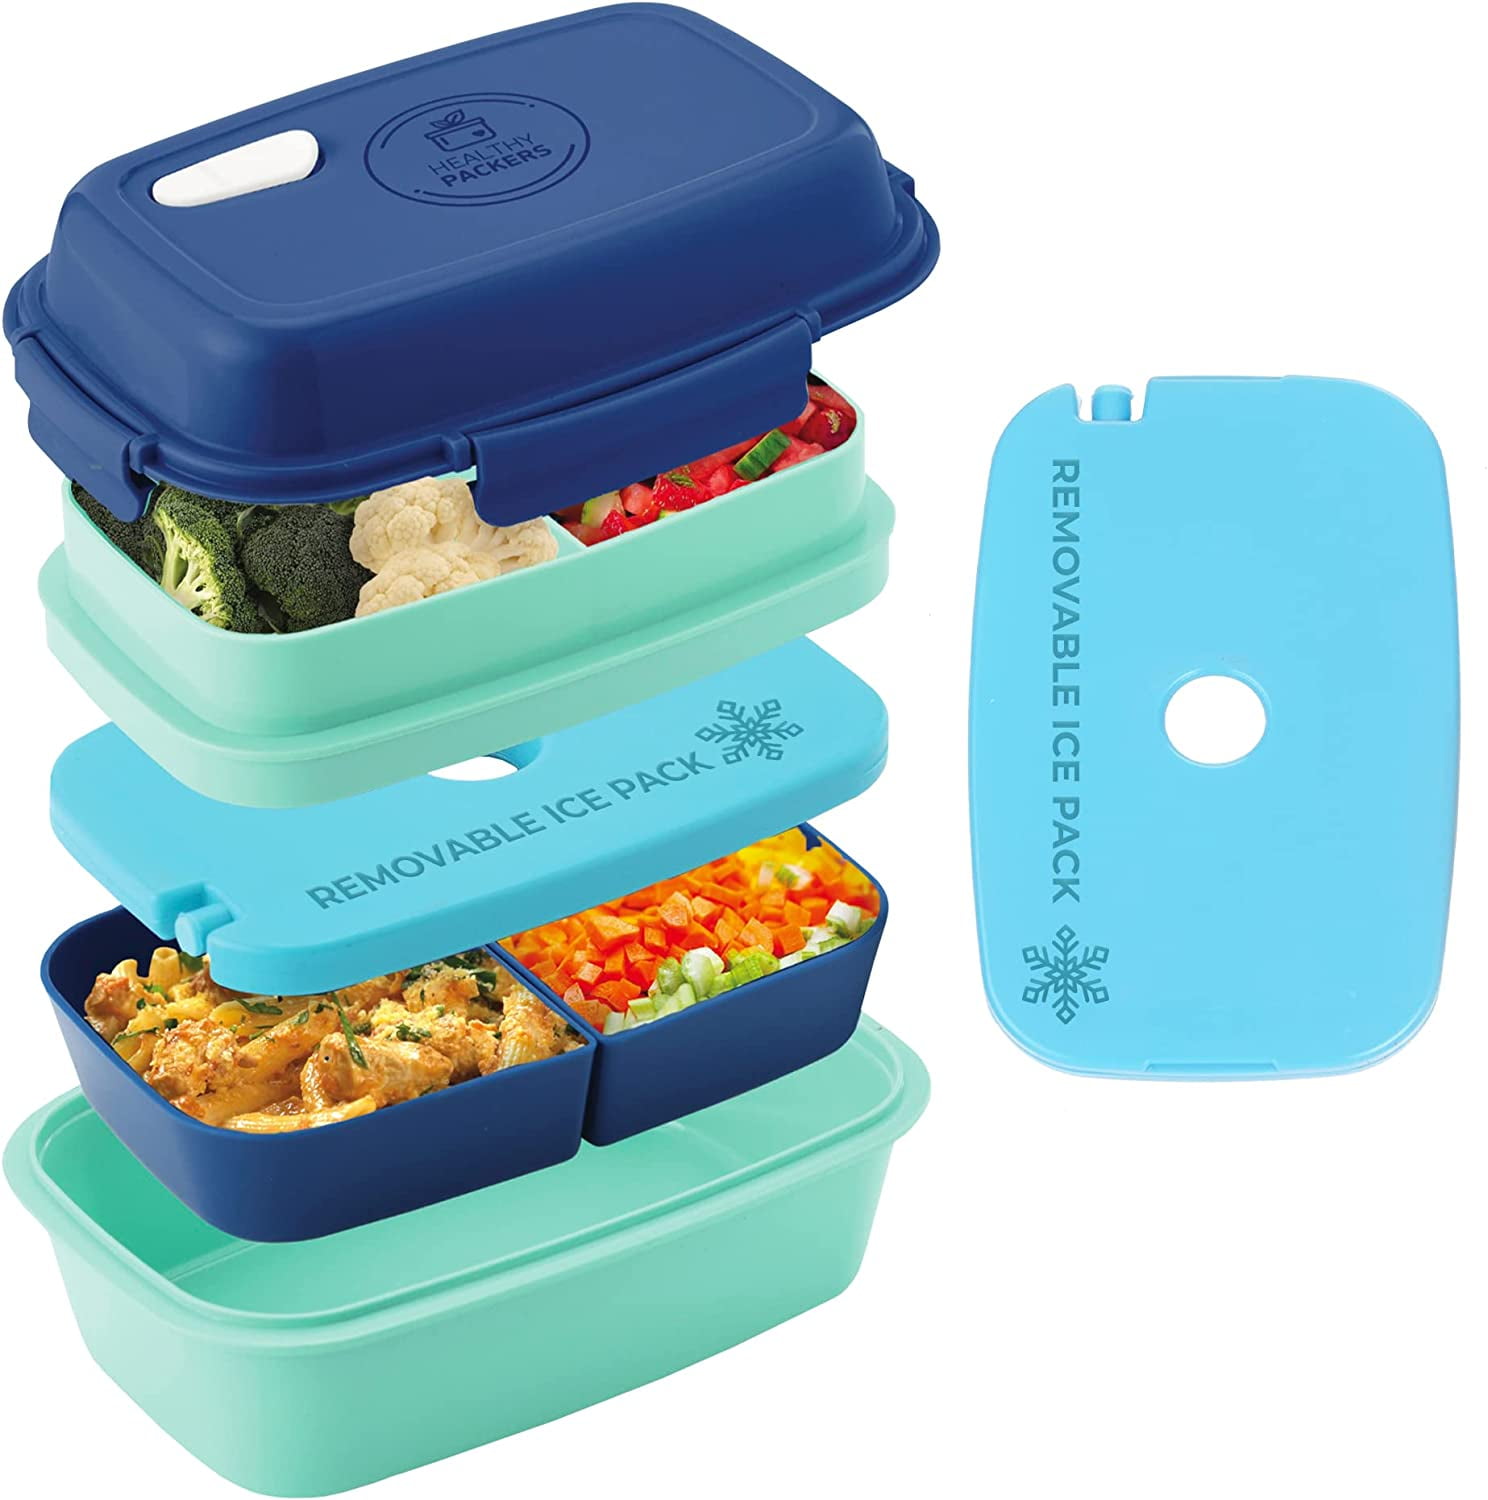 Flatware Included Lunch Box for Adult Microwave Safe Lunch Containers with 3 Compartments Bento Box for Kids Round Transparent 